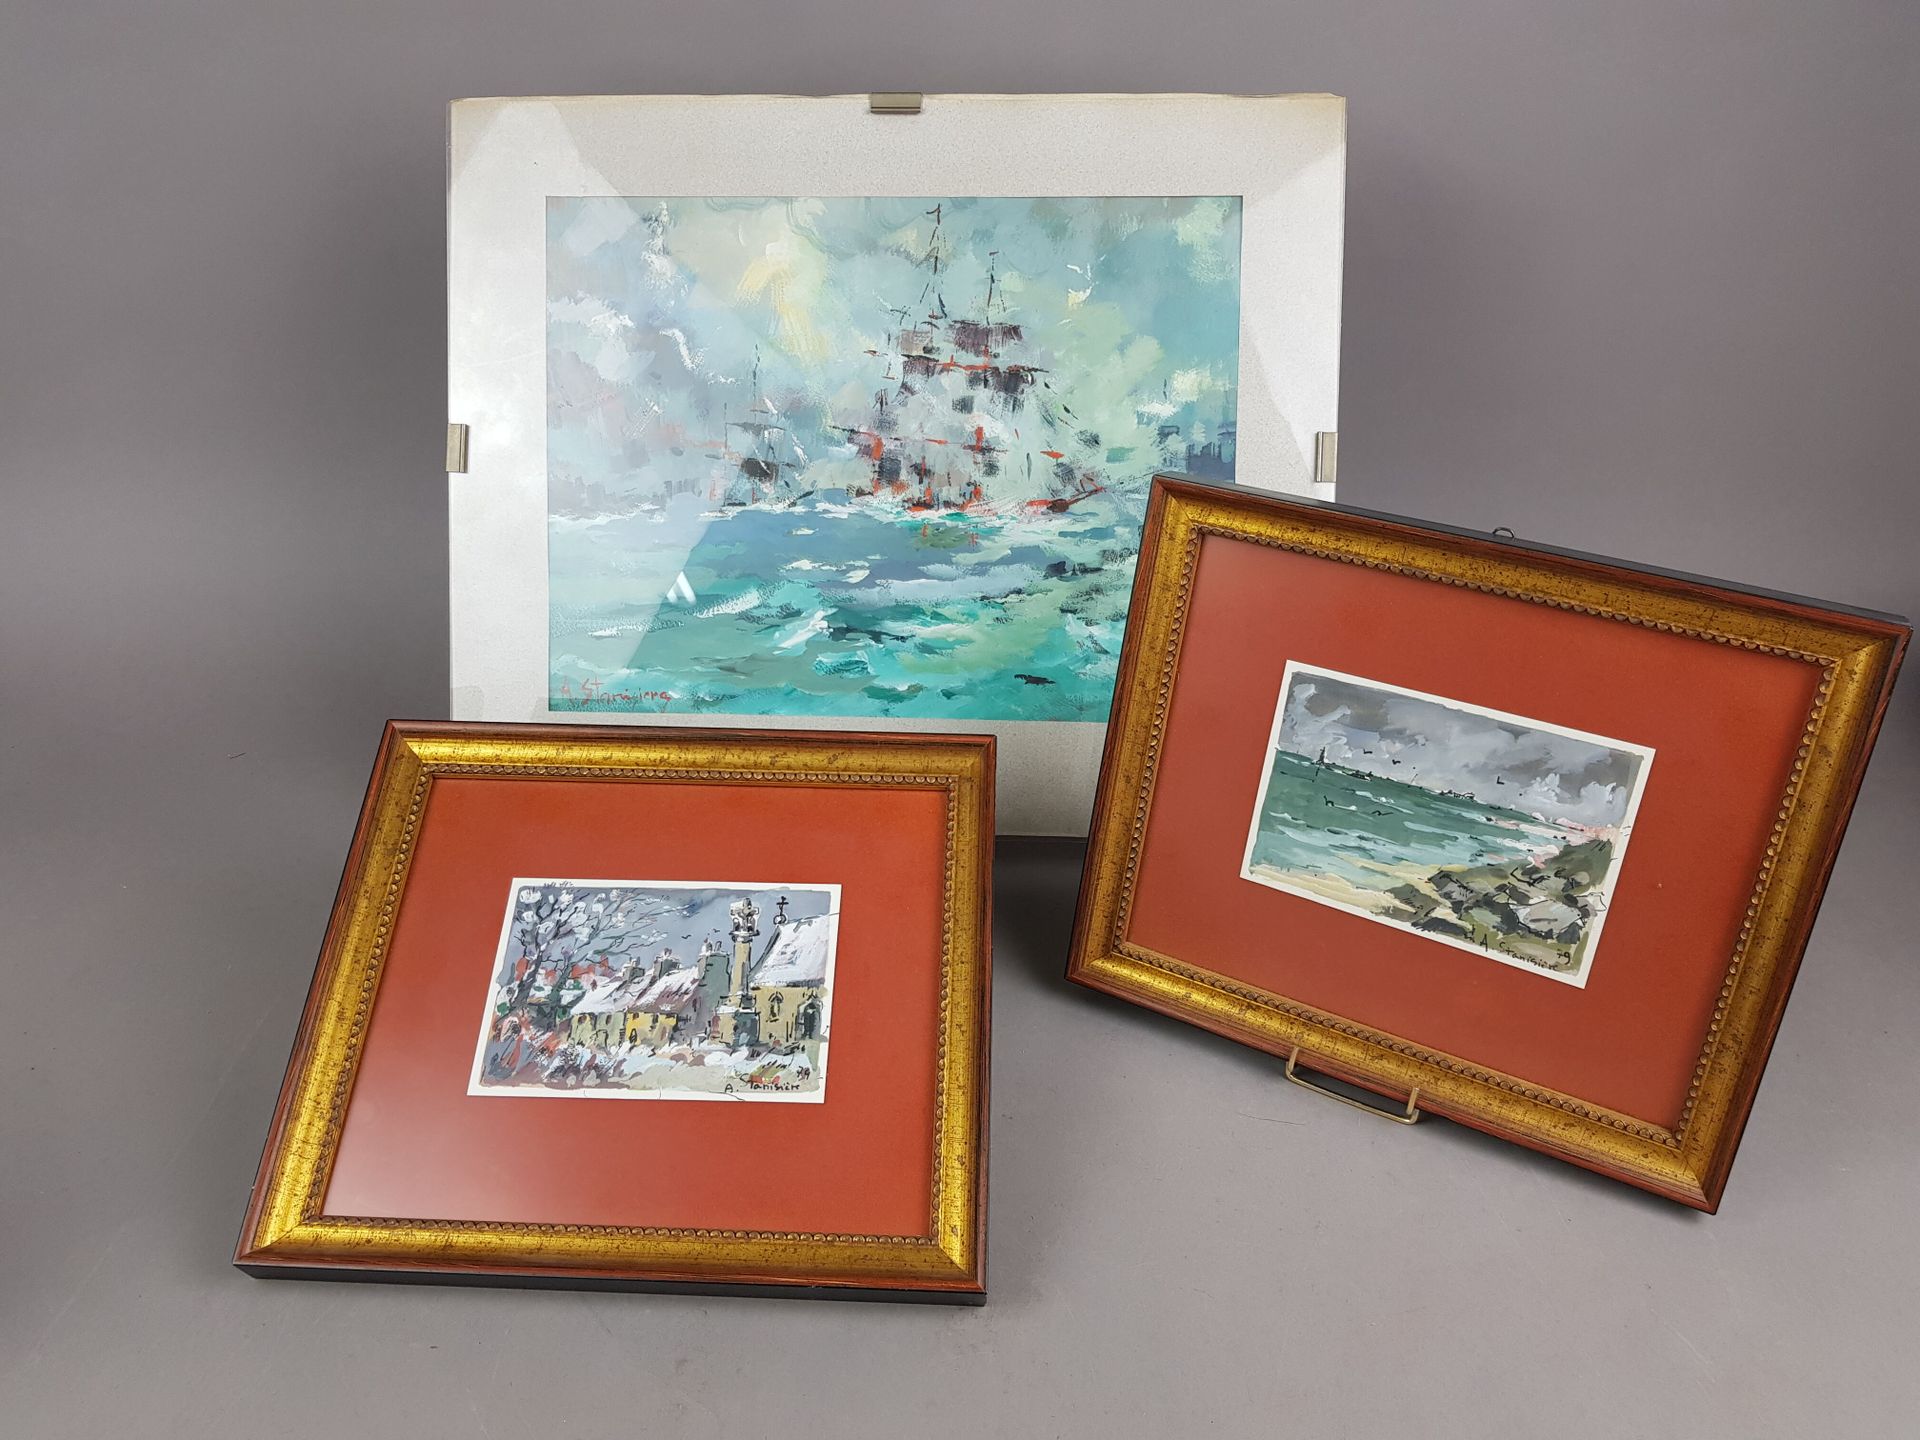 Null Antoine STANISIERE (1934)
"Village view", "Port" and "Boat at sea
1979
Thre&hellip;